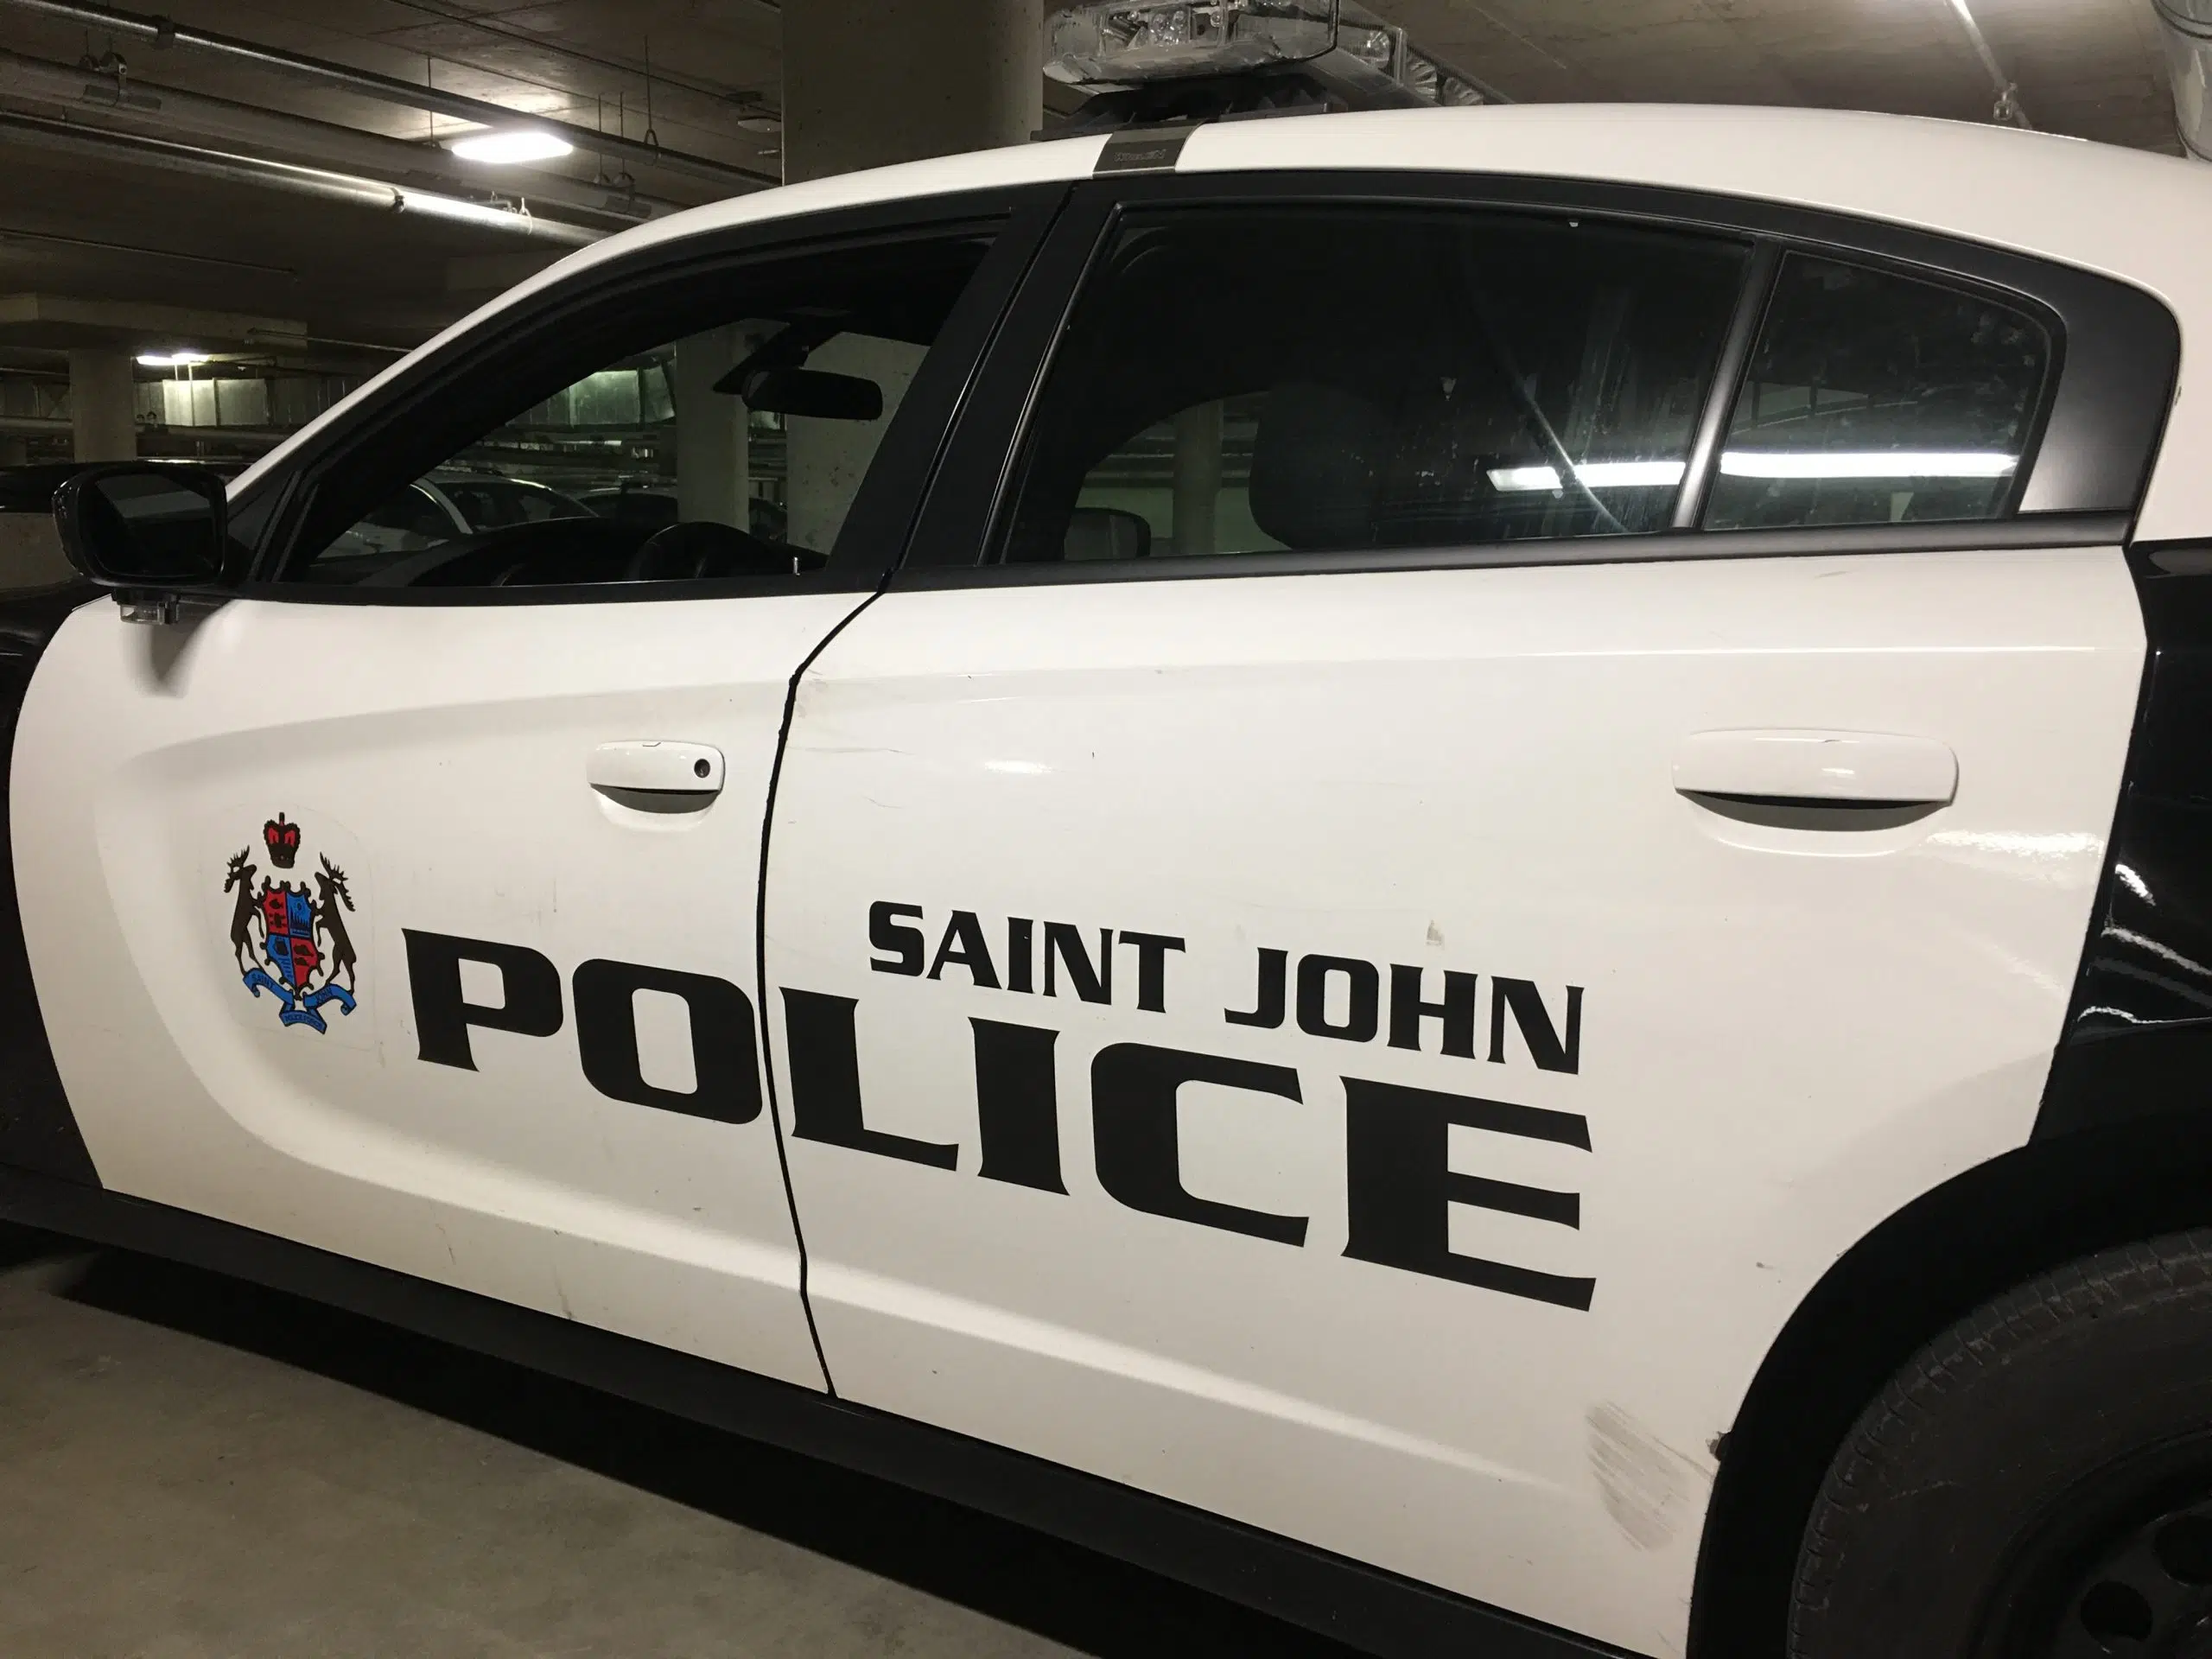 Lost Driver Arrested For Impaired Driving